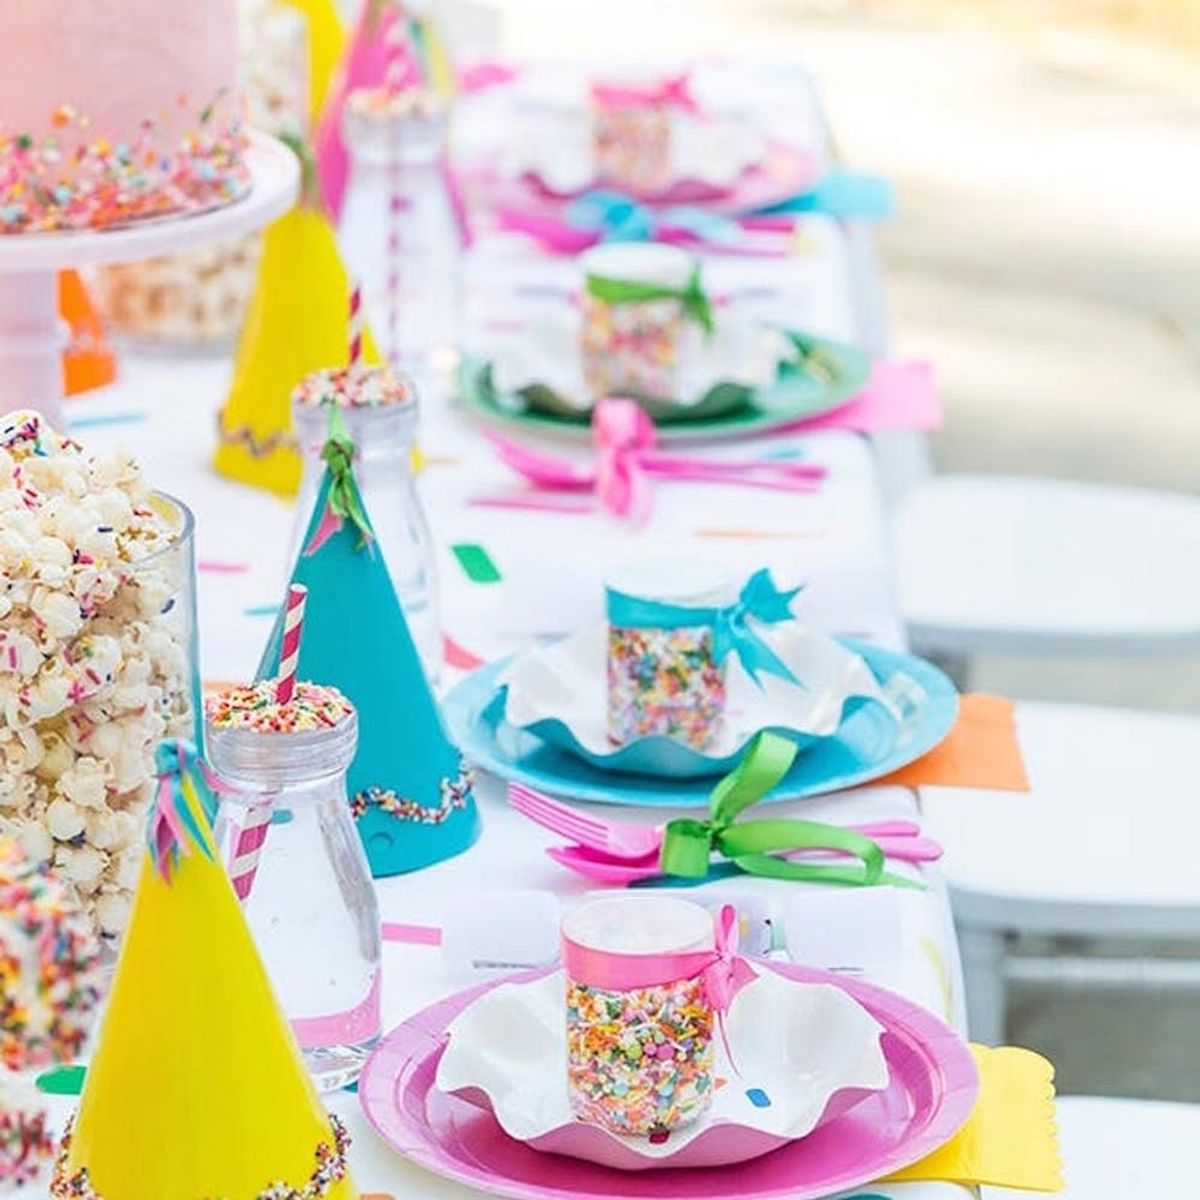 10 Kid Party Themes That Are Too Cute for Words